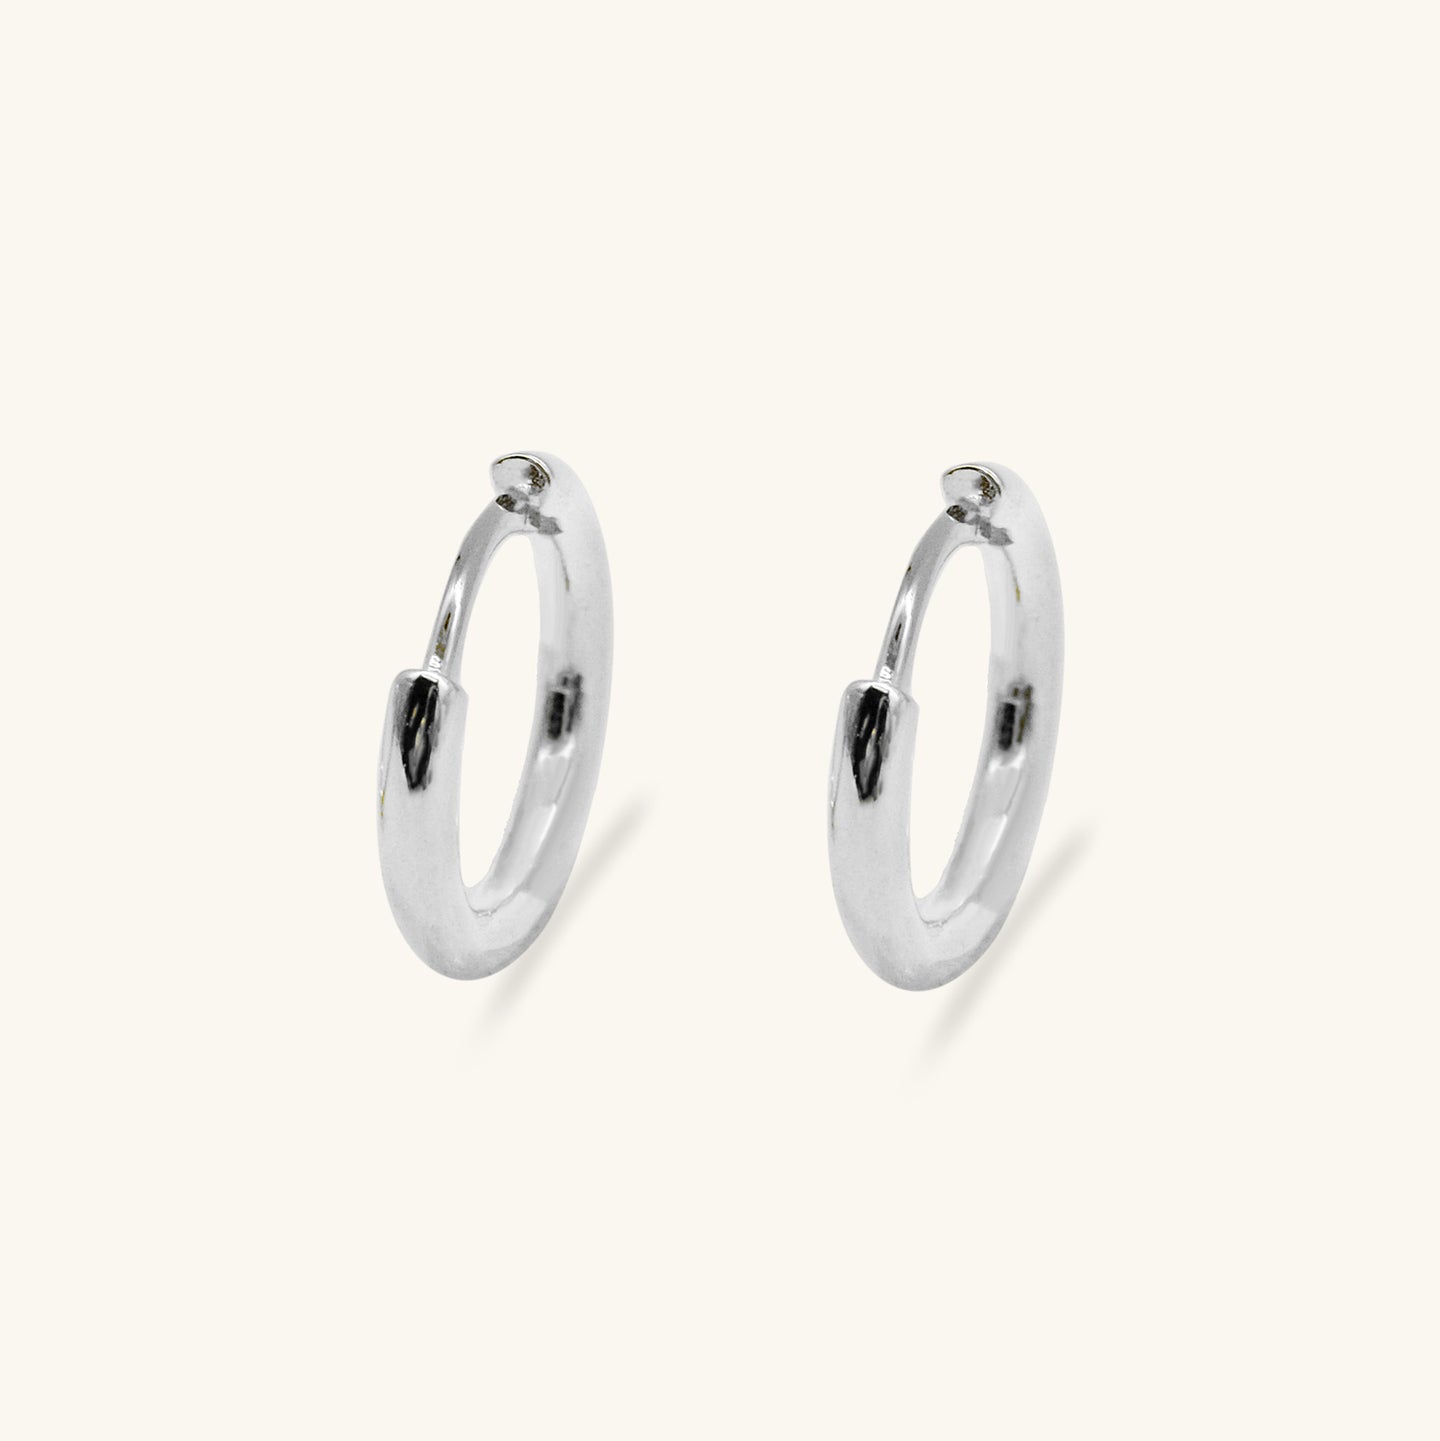 Subtle 15mm Hoop Earrings in Gold and Silver by HYMI